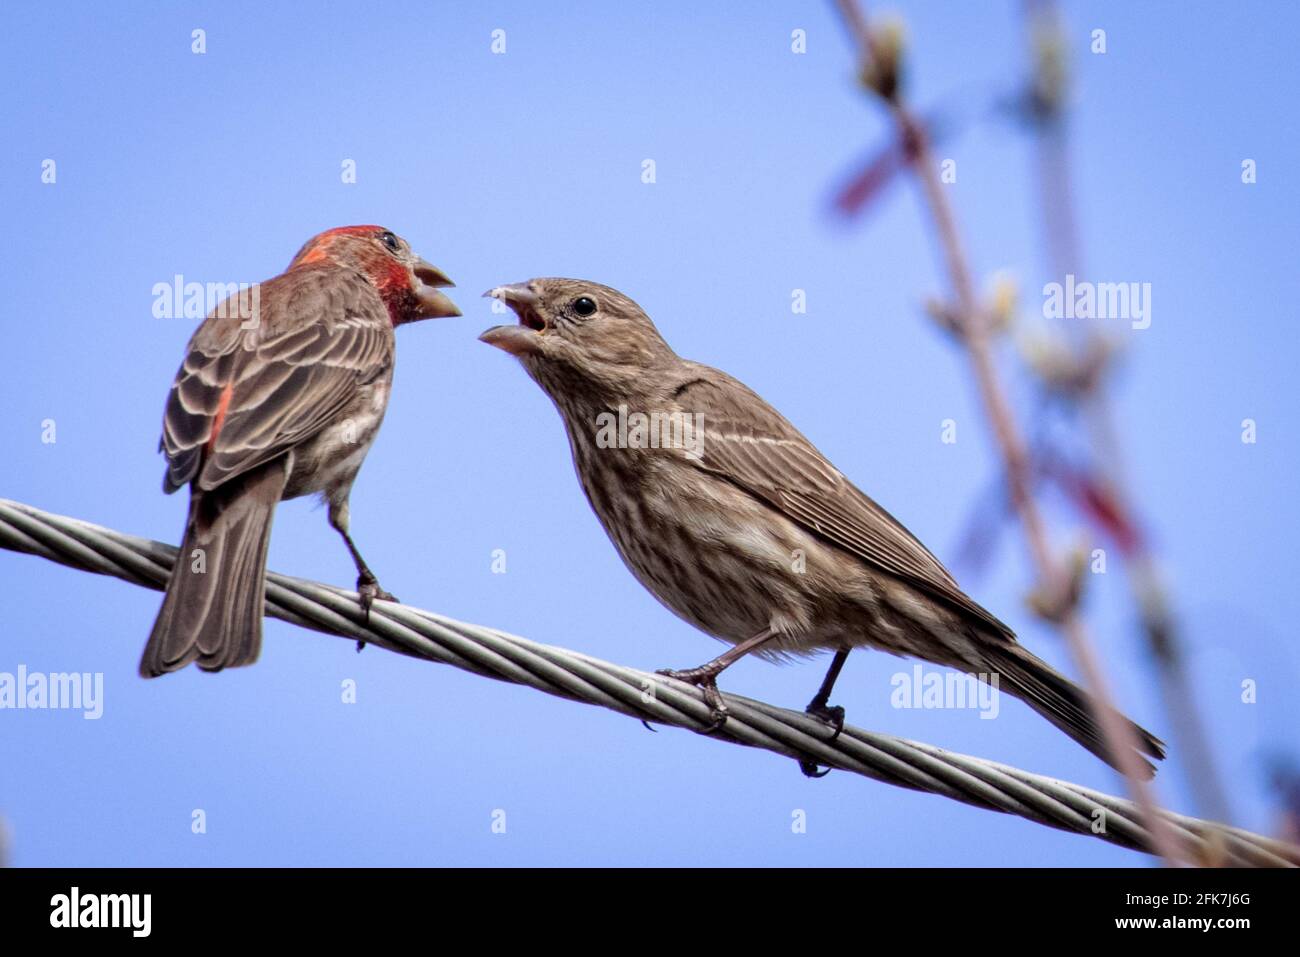 House Finch (Haemorhous mexicanus) - Hall County, Georgia. Two female House finches squabbling. Stock Photo